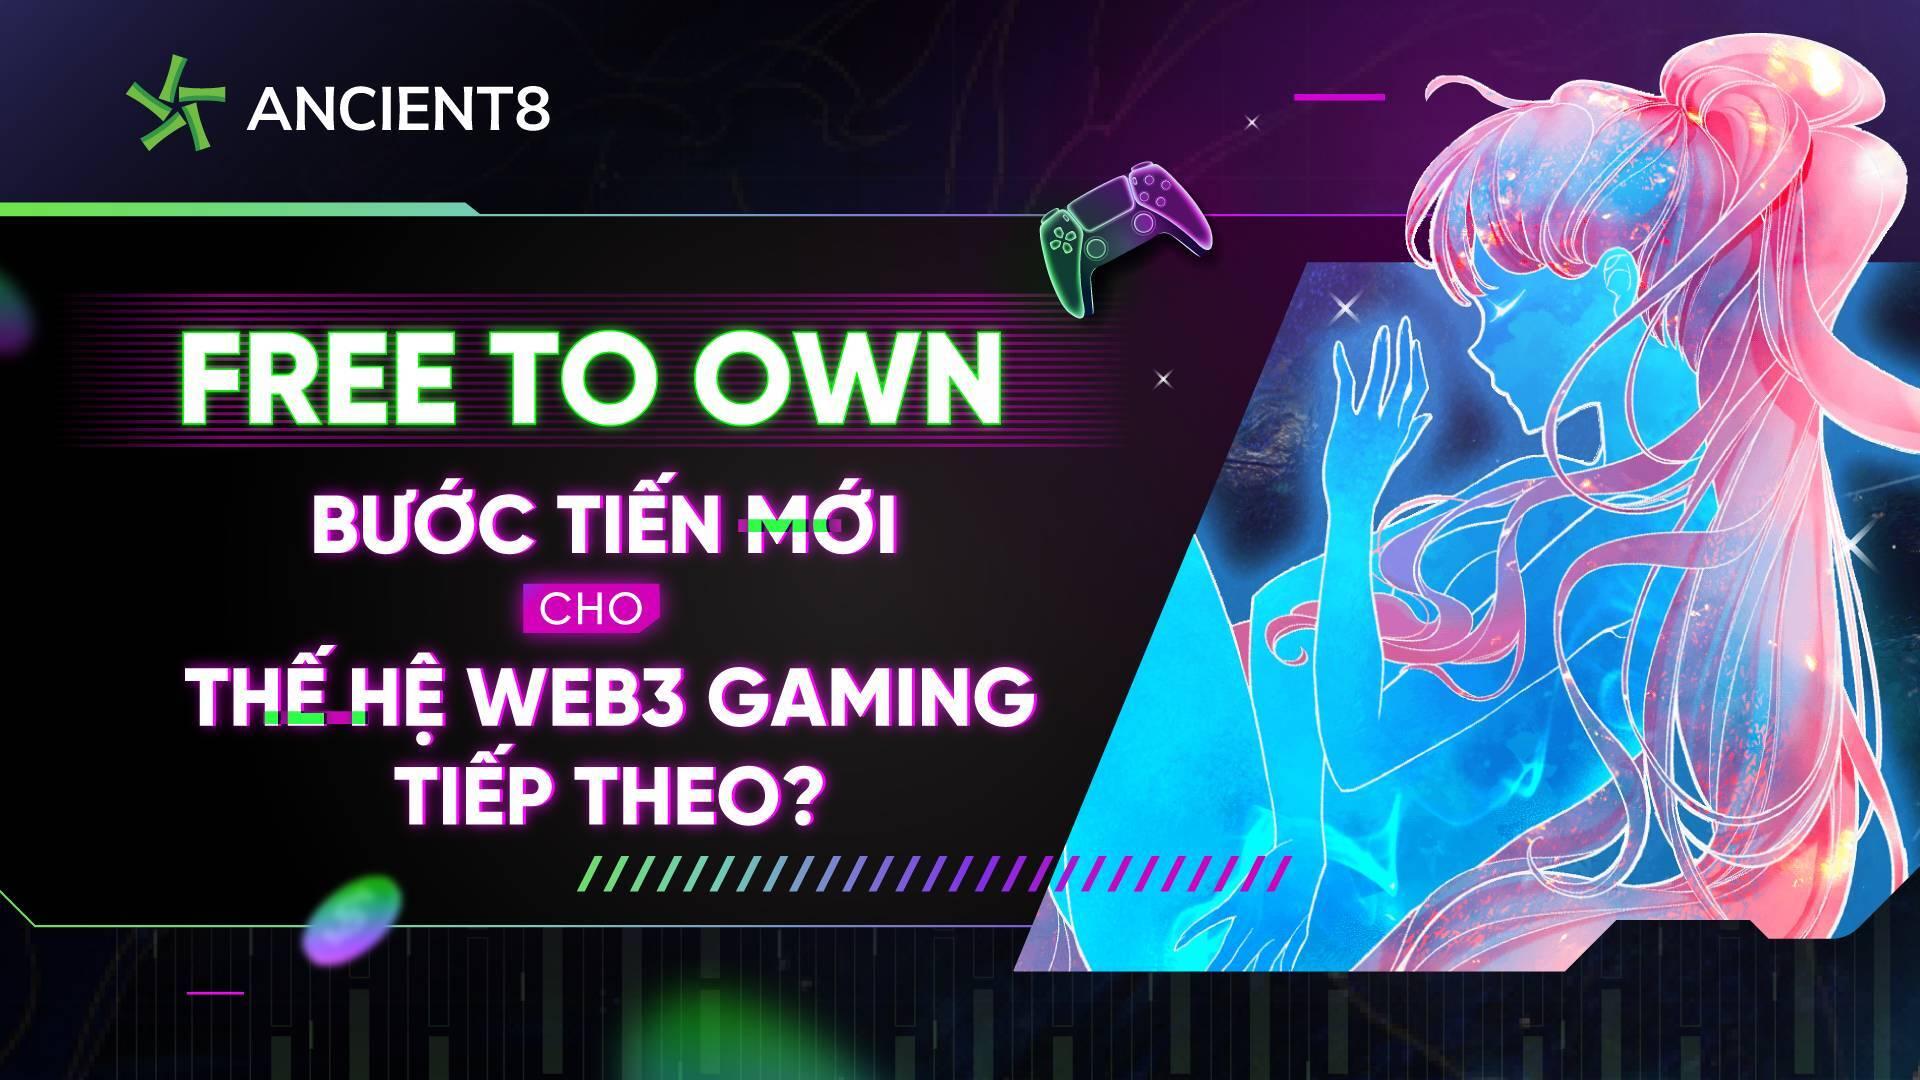 free-to-own-buoc-tien-moi-cho-the-he-web3-gaming-tiep-theo